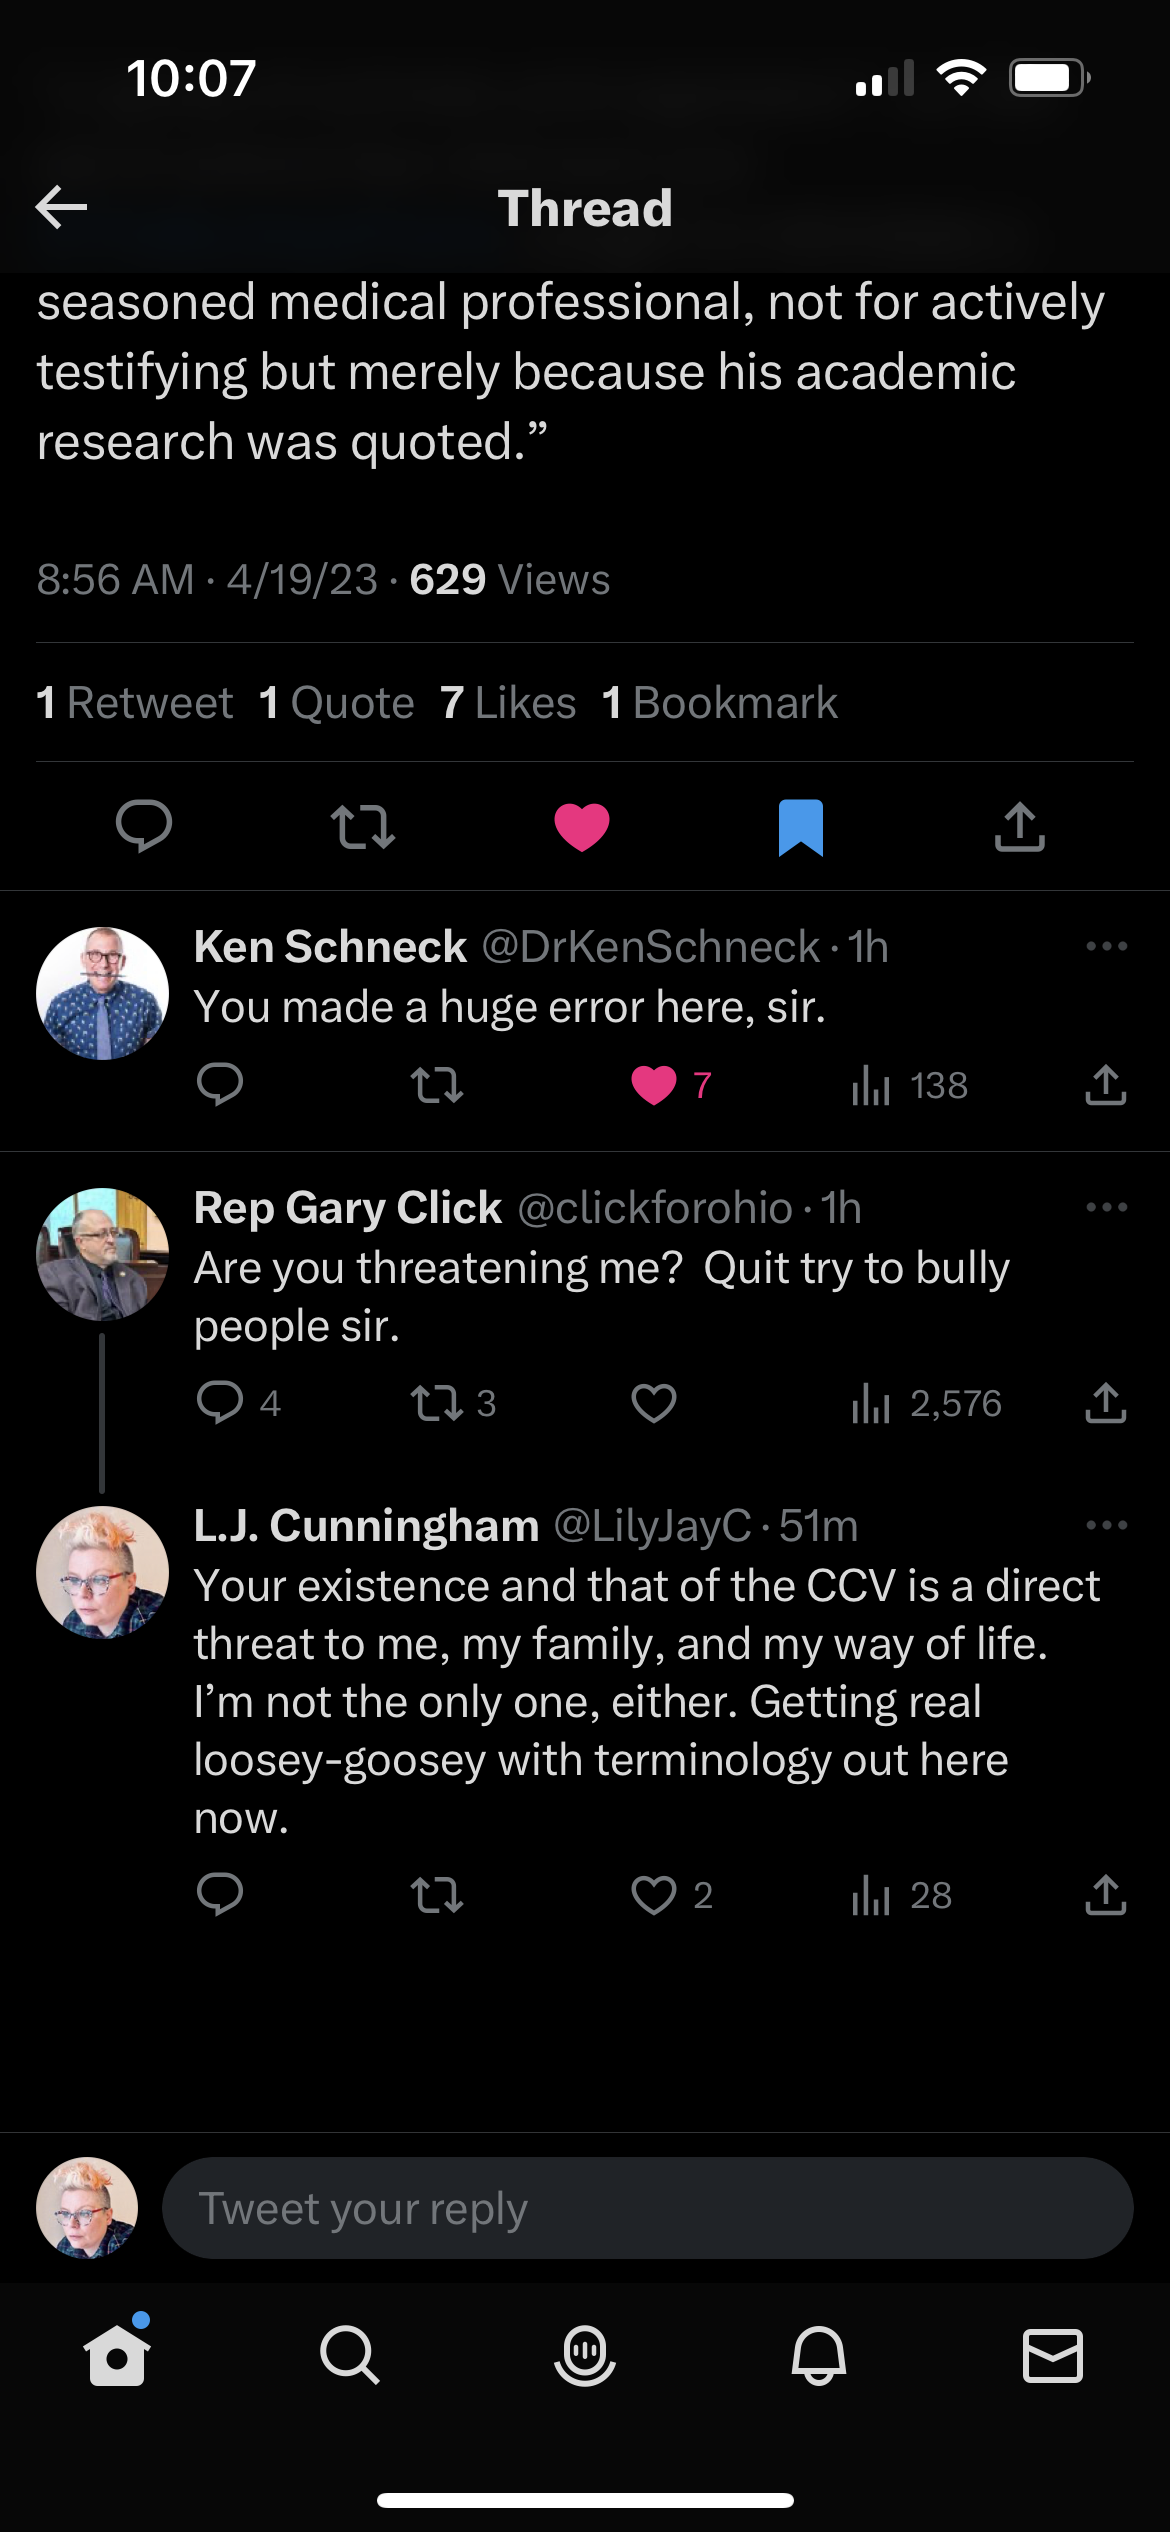 image of ongoing thread where Gary Click is harassing openly gay Dr. Ken Schneck of the Buckeye Flame. I ask Ken if Gary is harassing constituents in real time